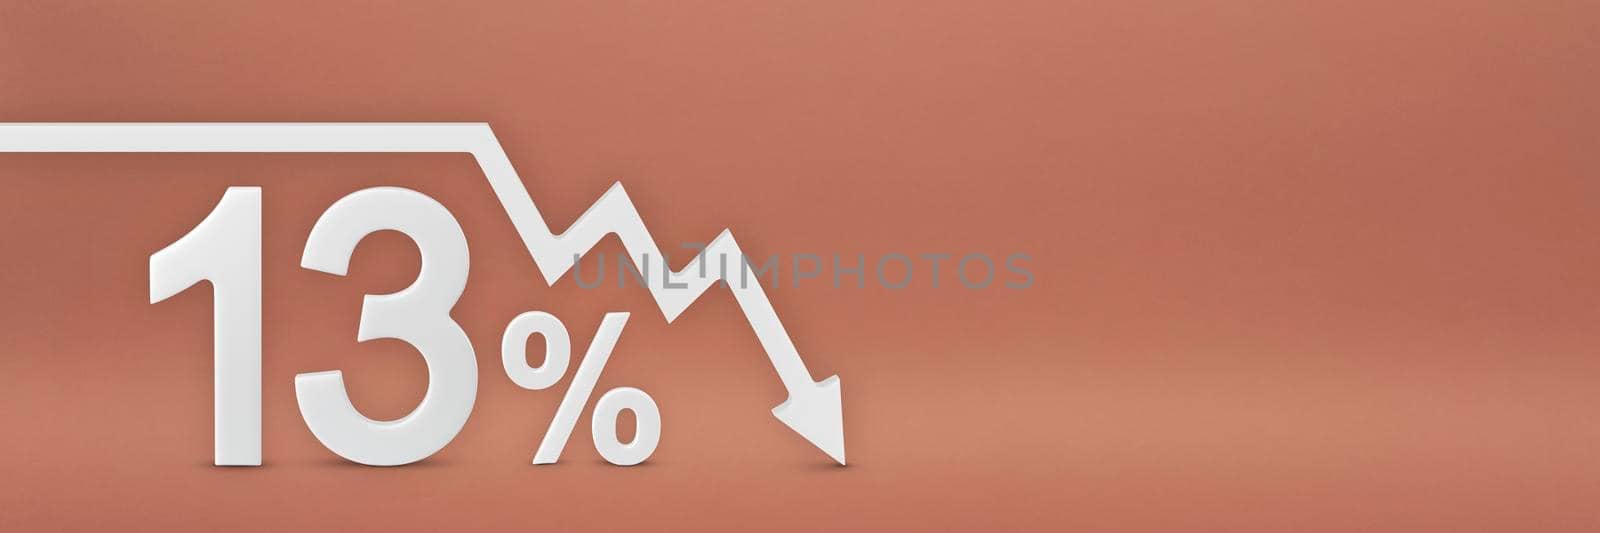 thirteen percent, the arrow on the graph is pointing down. Stock market crash, bear market, inflation. Economic collapse, collapse of stocks. 3d banner, 13 percent discount sign on a red background. by SERSOL